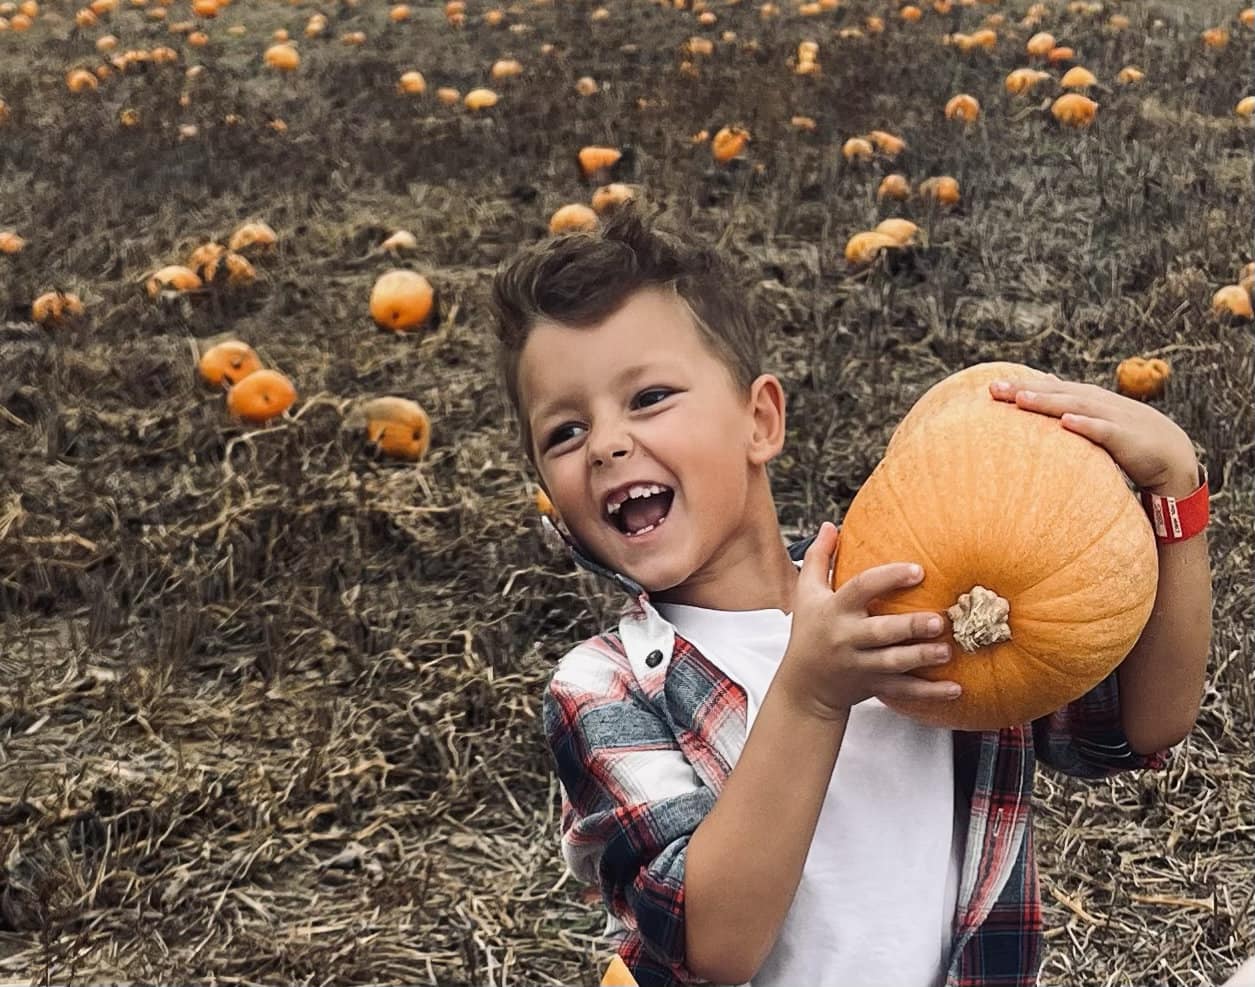 small boy holding a pumpkin with an excited smile on his face.